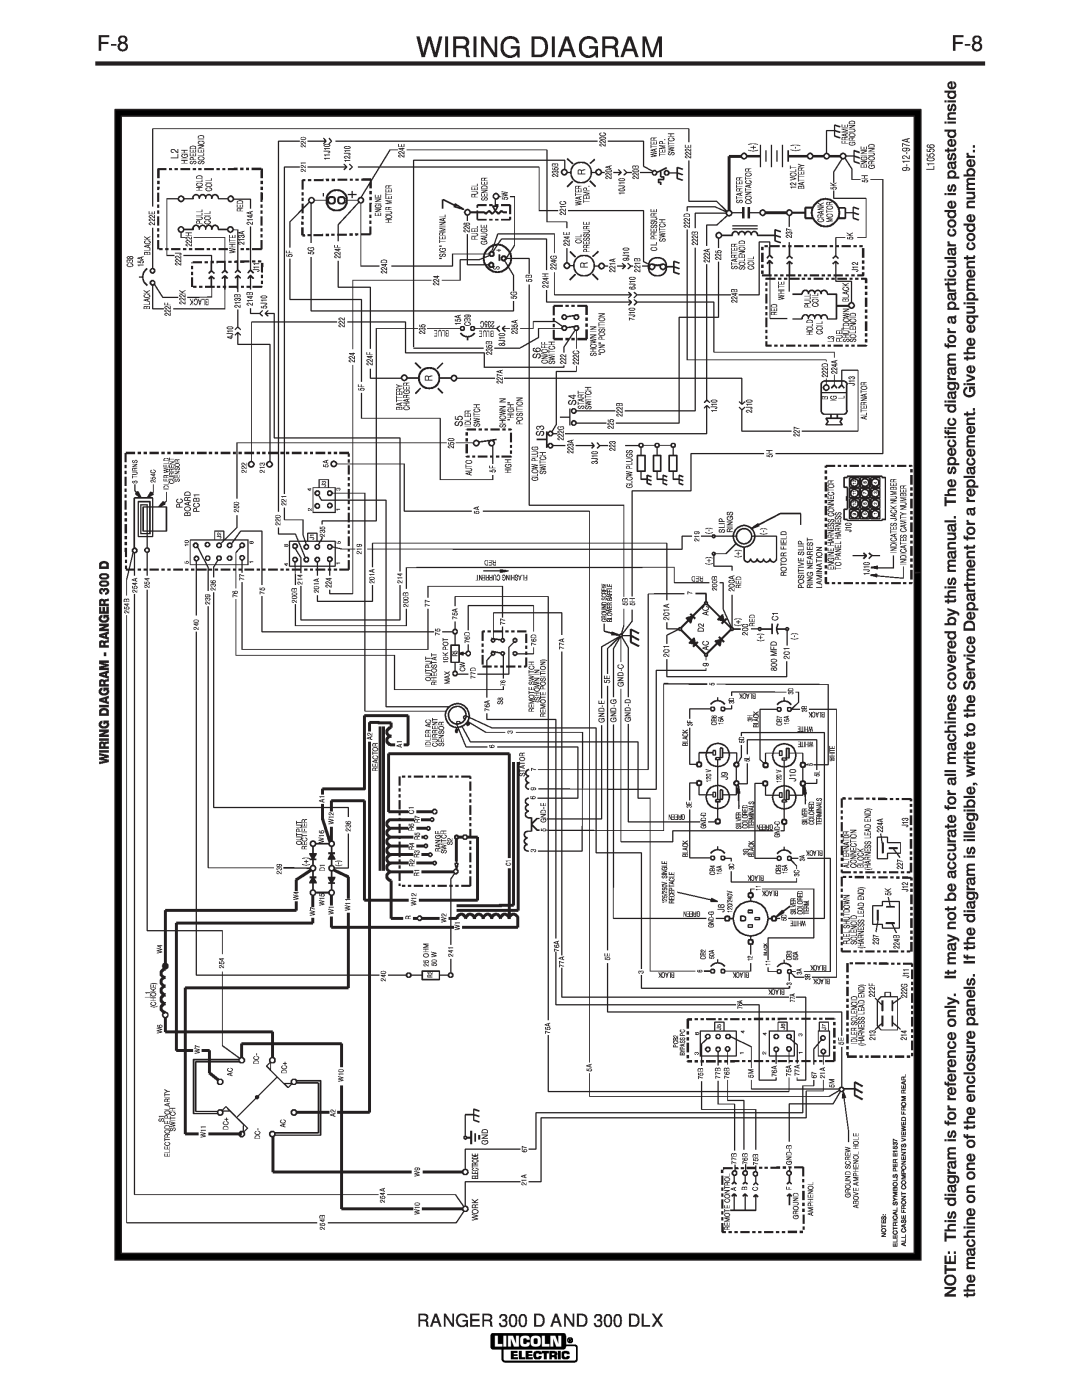 Lincoln Electric manual Wiring, Diagram, RANGER300, D AND 300 DLX 